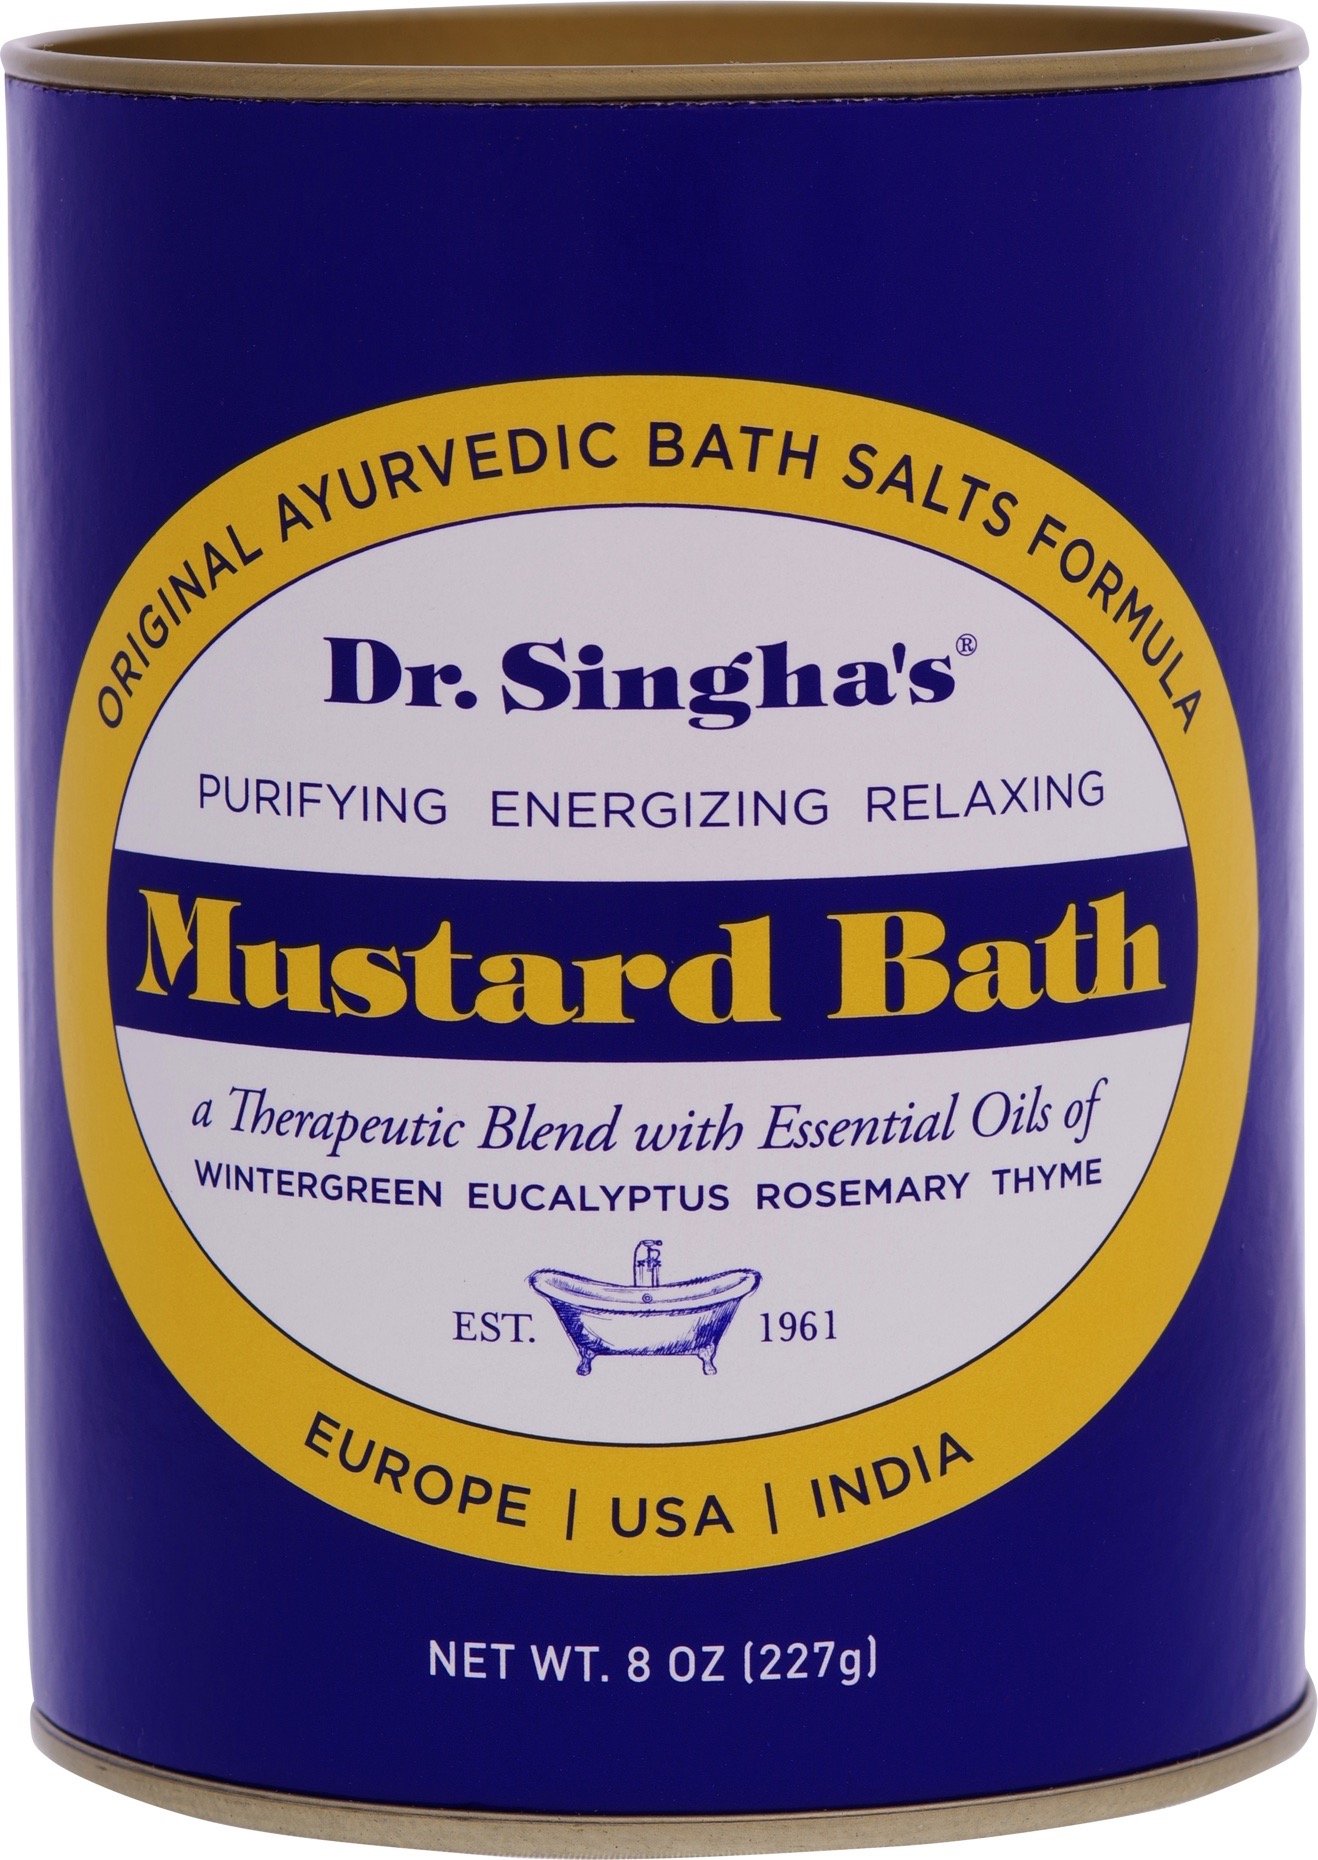 Product Listing Image for Dr Singhas Mustard Bath